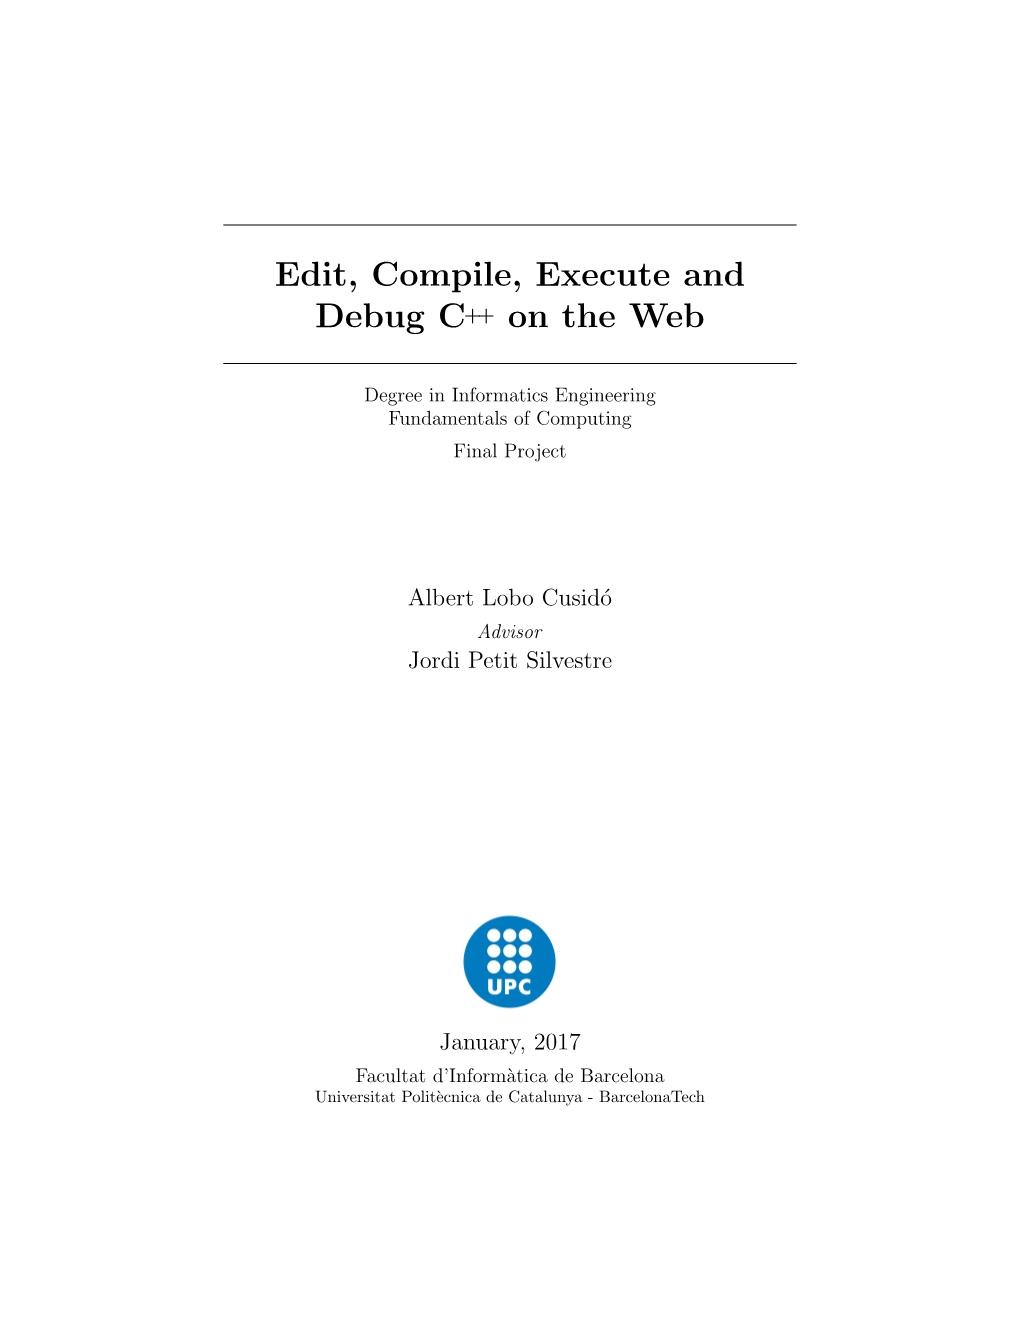 Edit, Compile, Execute and Debug C++ on the Web